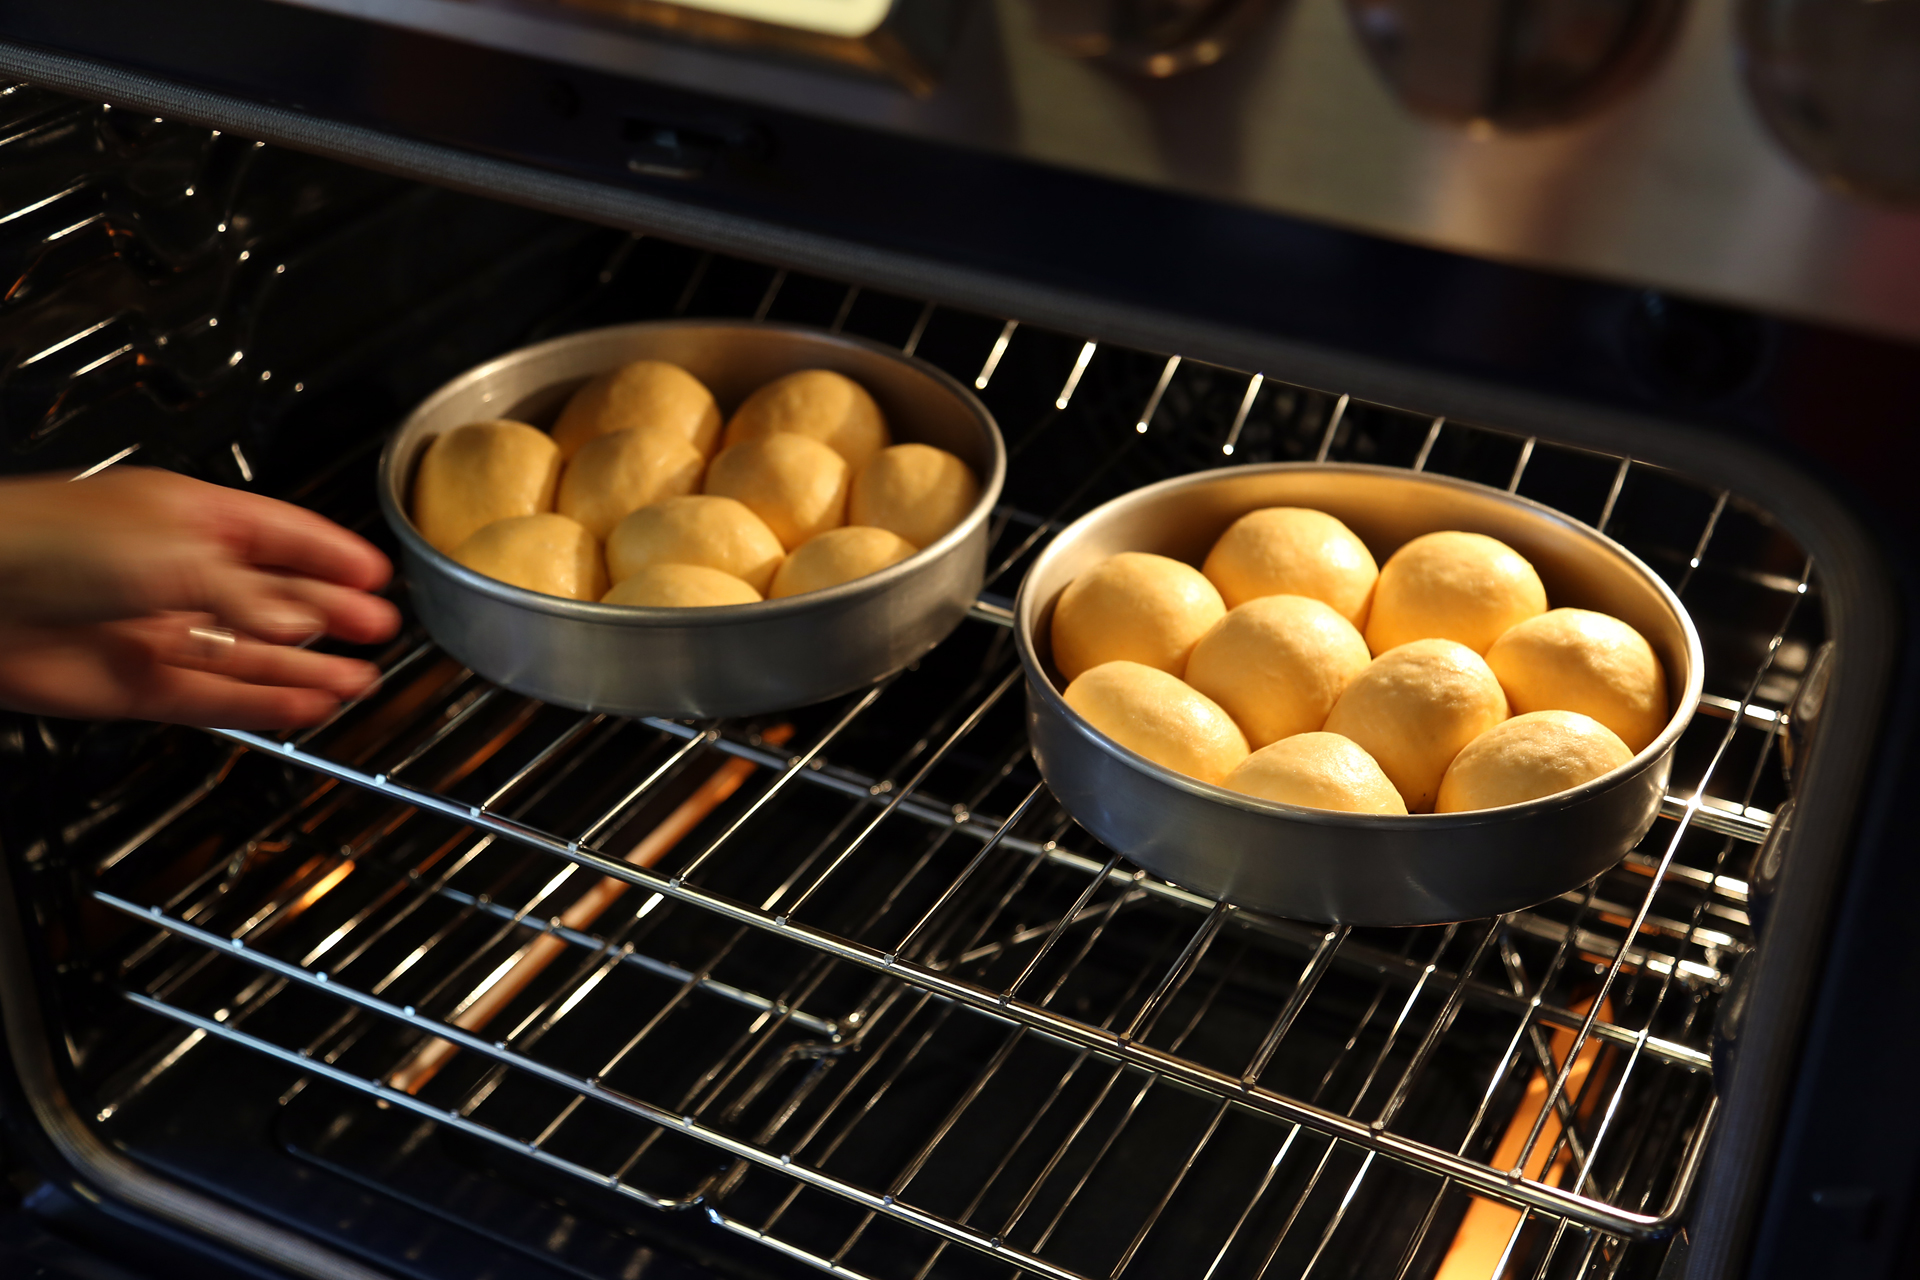 Position a rack in the middle of the oven and preheat to 375°F. Bake until the rolls are golden, about 18 minutes.